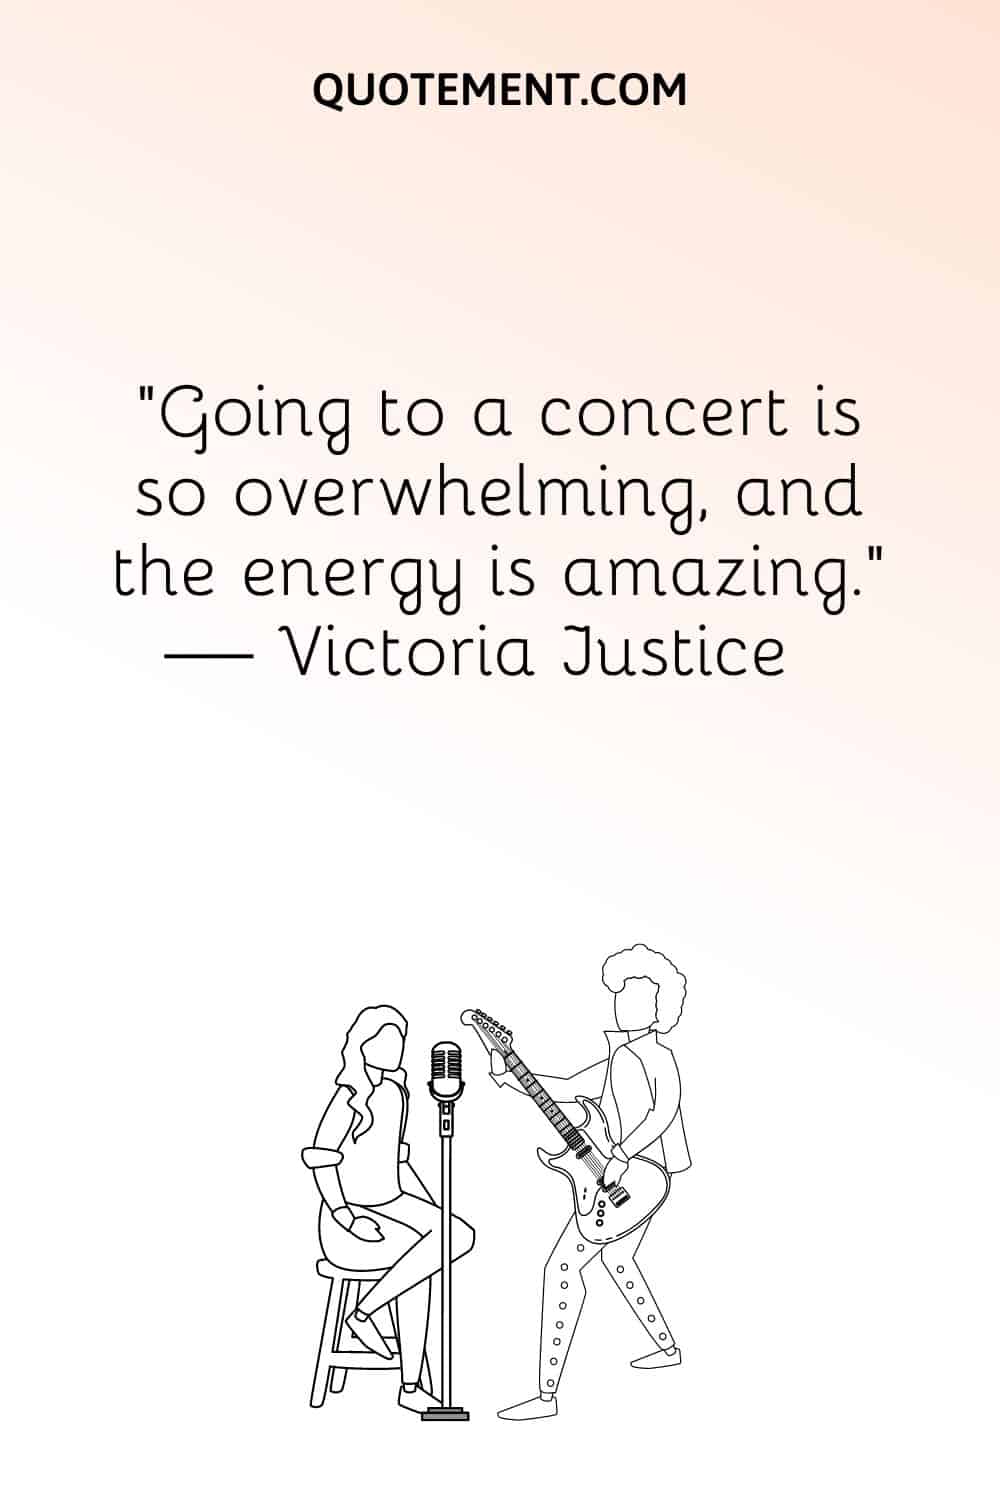 “Going to a concert is so overwhelming, and the energy is amazing.” — Victoria Justice